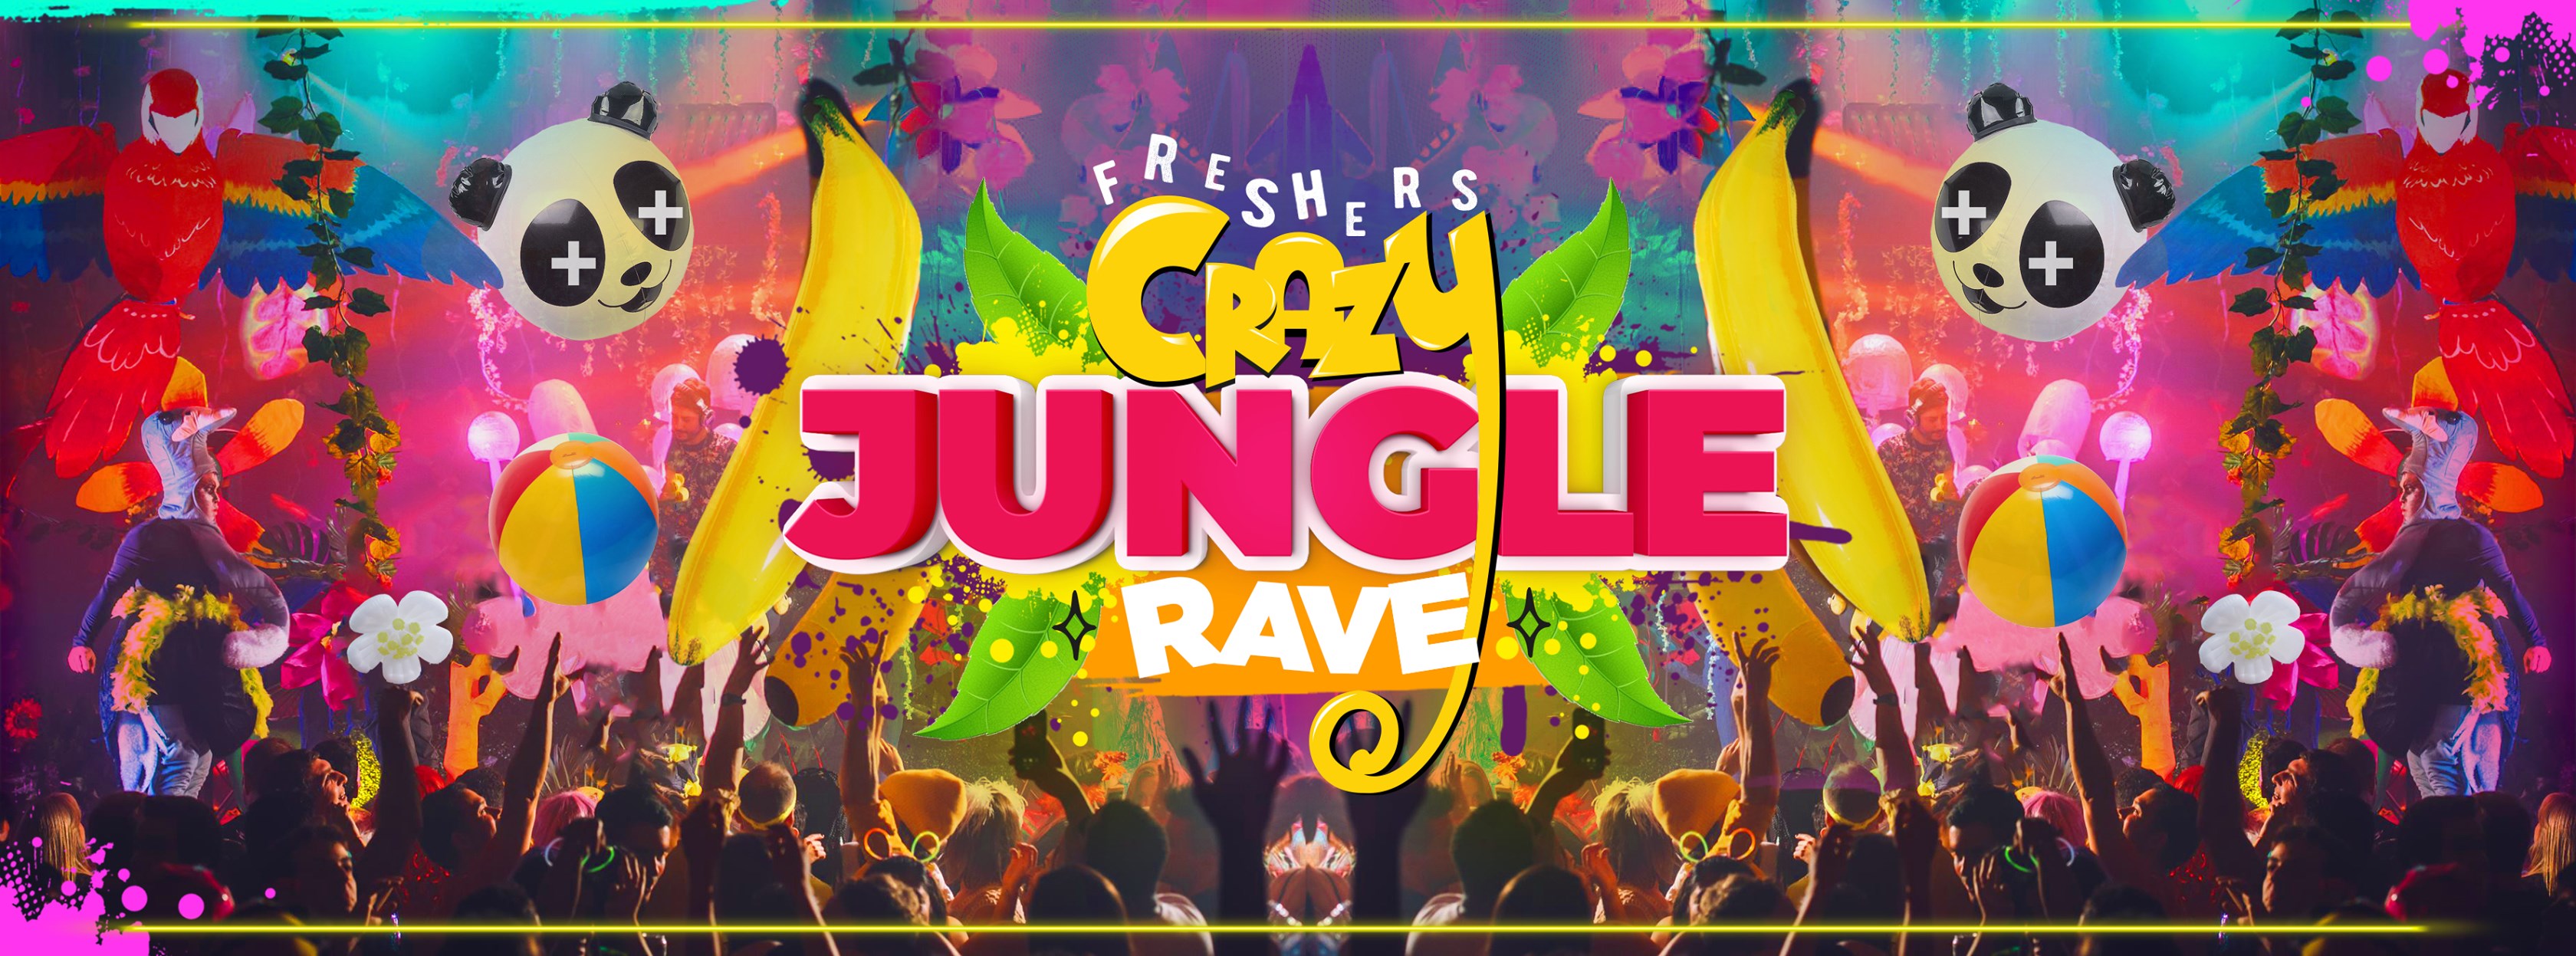 The Big Freshers Crazy Jungle Rave Uk Tour At Various Cities Across Uk London On 13th Sep Fatsoma